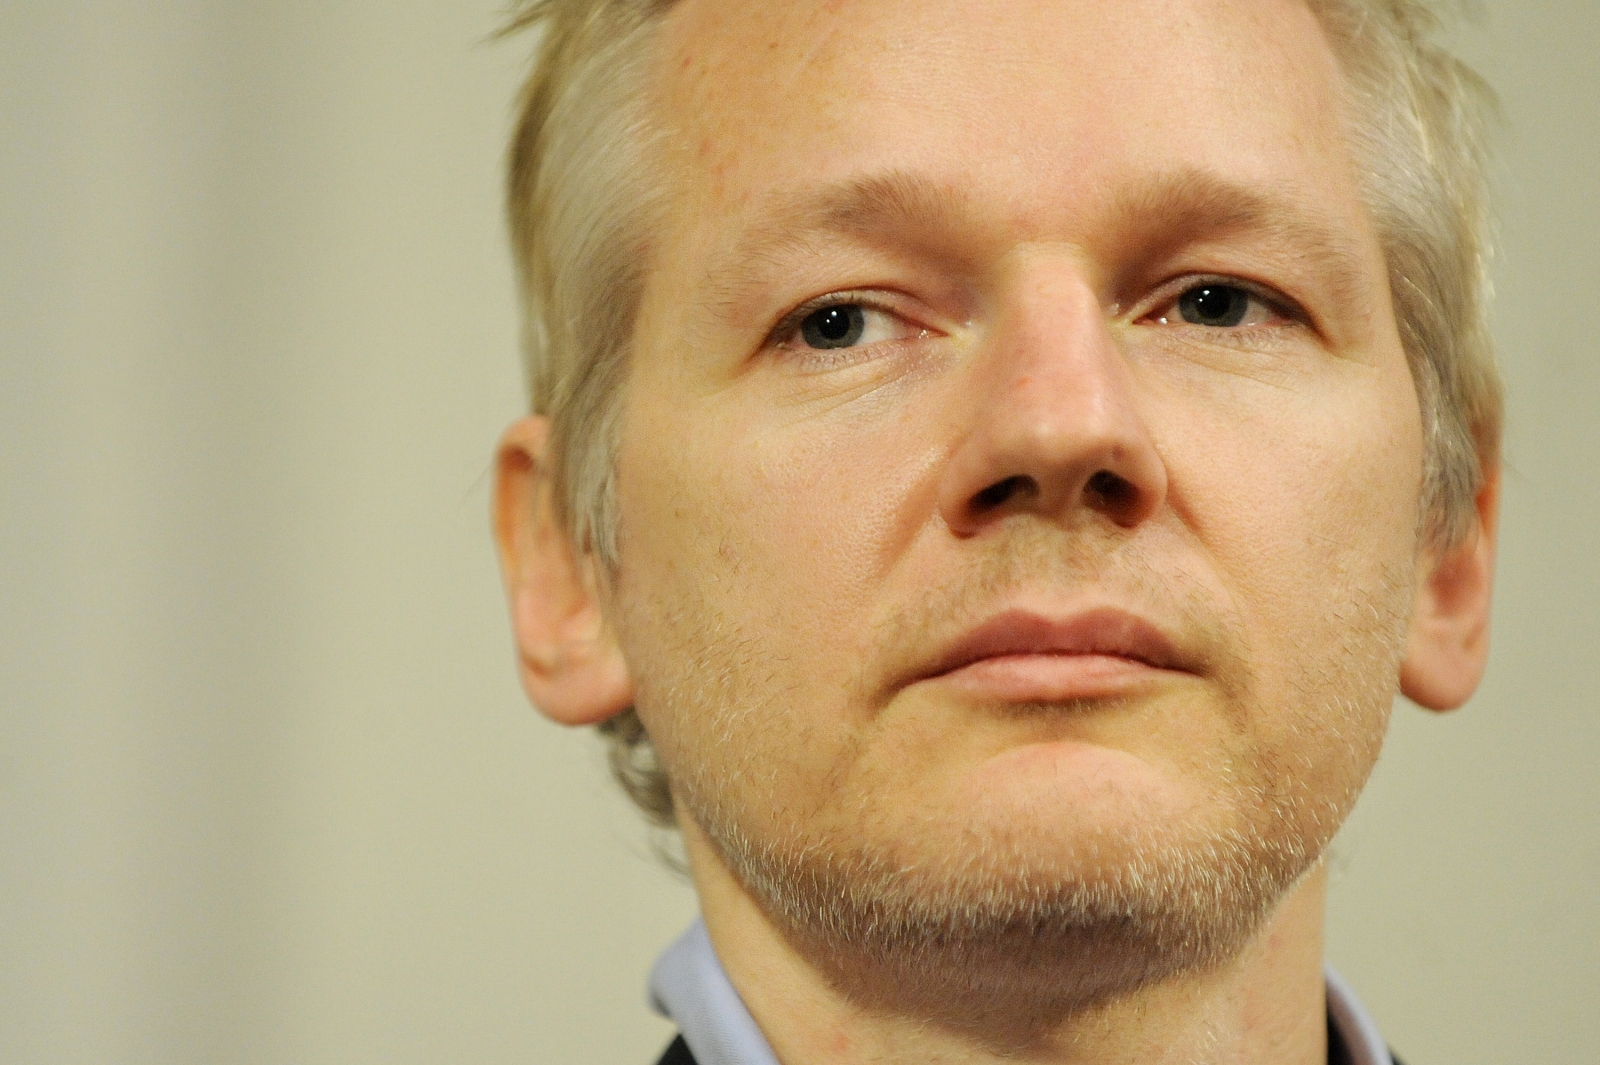 WikiLeaks begs followers to stop spreading conspiracy theories about death of Julian Assange - International Business Times UK